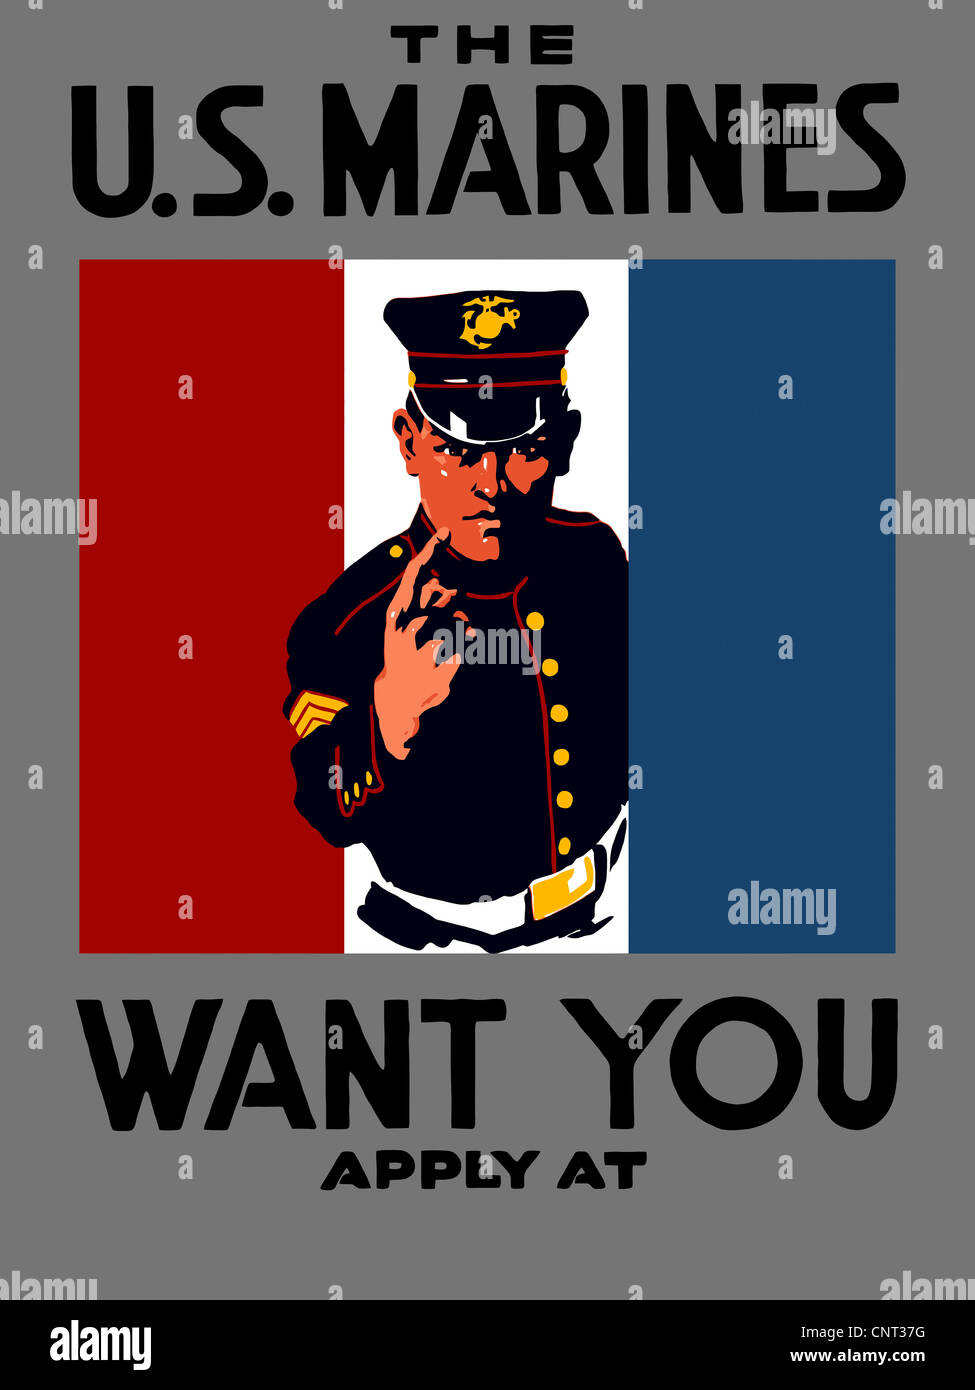 Vintage World War One poster of a Marine wearing his dress blues, pointing forward. It declares - The U.S. Marines Want You. Stock Photo